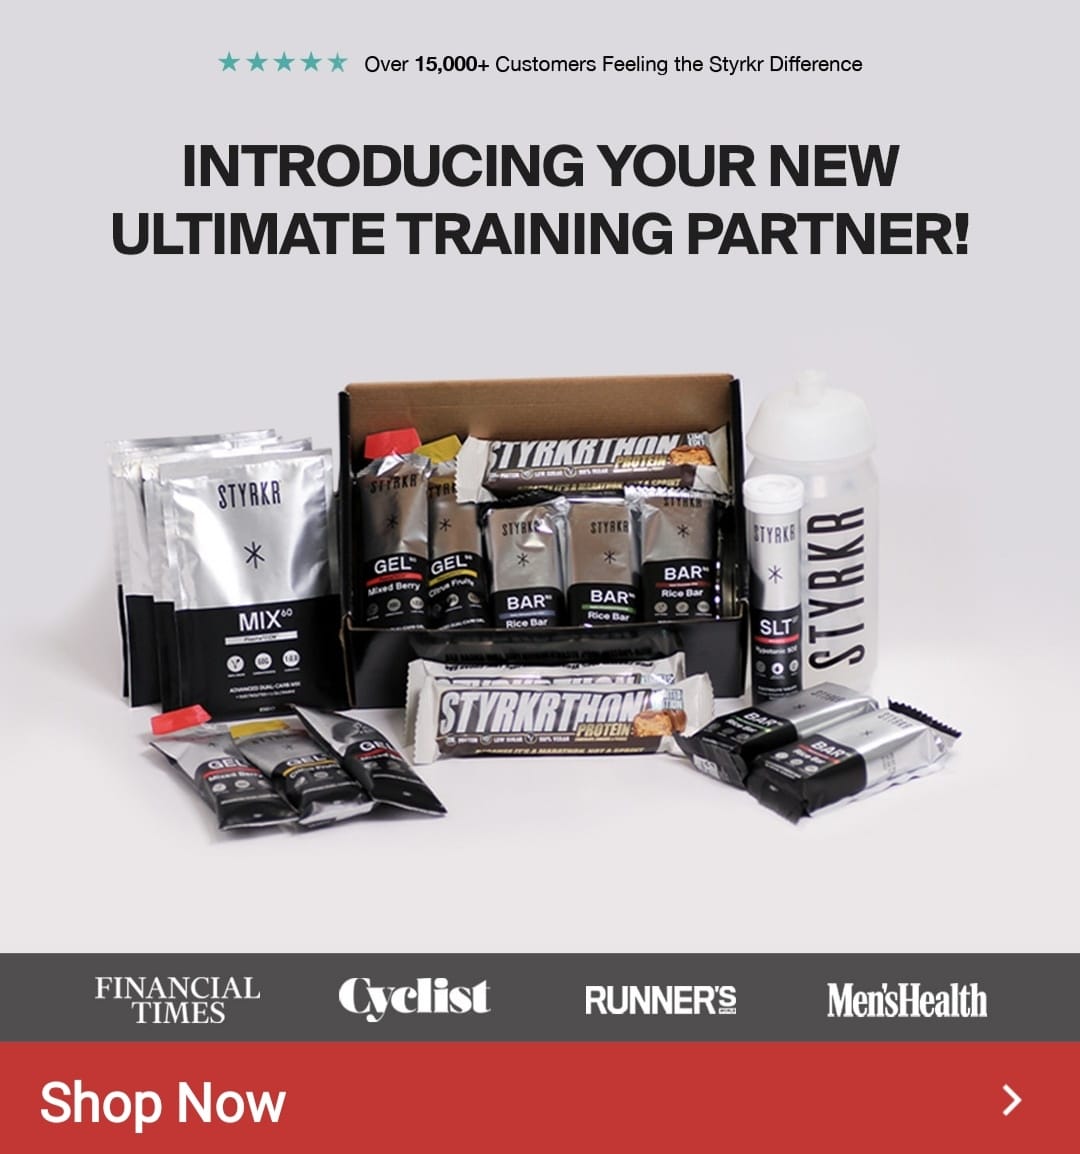 #CyclingBargains - STYRKR Performance Nutrition - Your Ultimate Training Partner | Highly recommended.
.
👉 styrkr.avln.me/c/uDtfcJMxqwVZ
👉 cycling-bargains.co.uk/cycling-deals?…
.
#roadcycling #cycling #cyclinglife #roadbike #cyclist #instacycling #ciclismo #bikelife #bicycle #strava #mtb #bikeporn